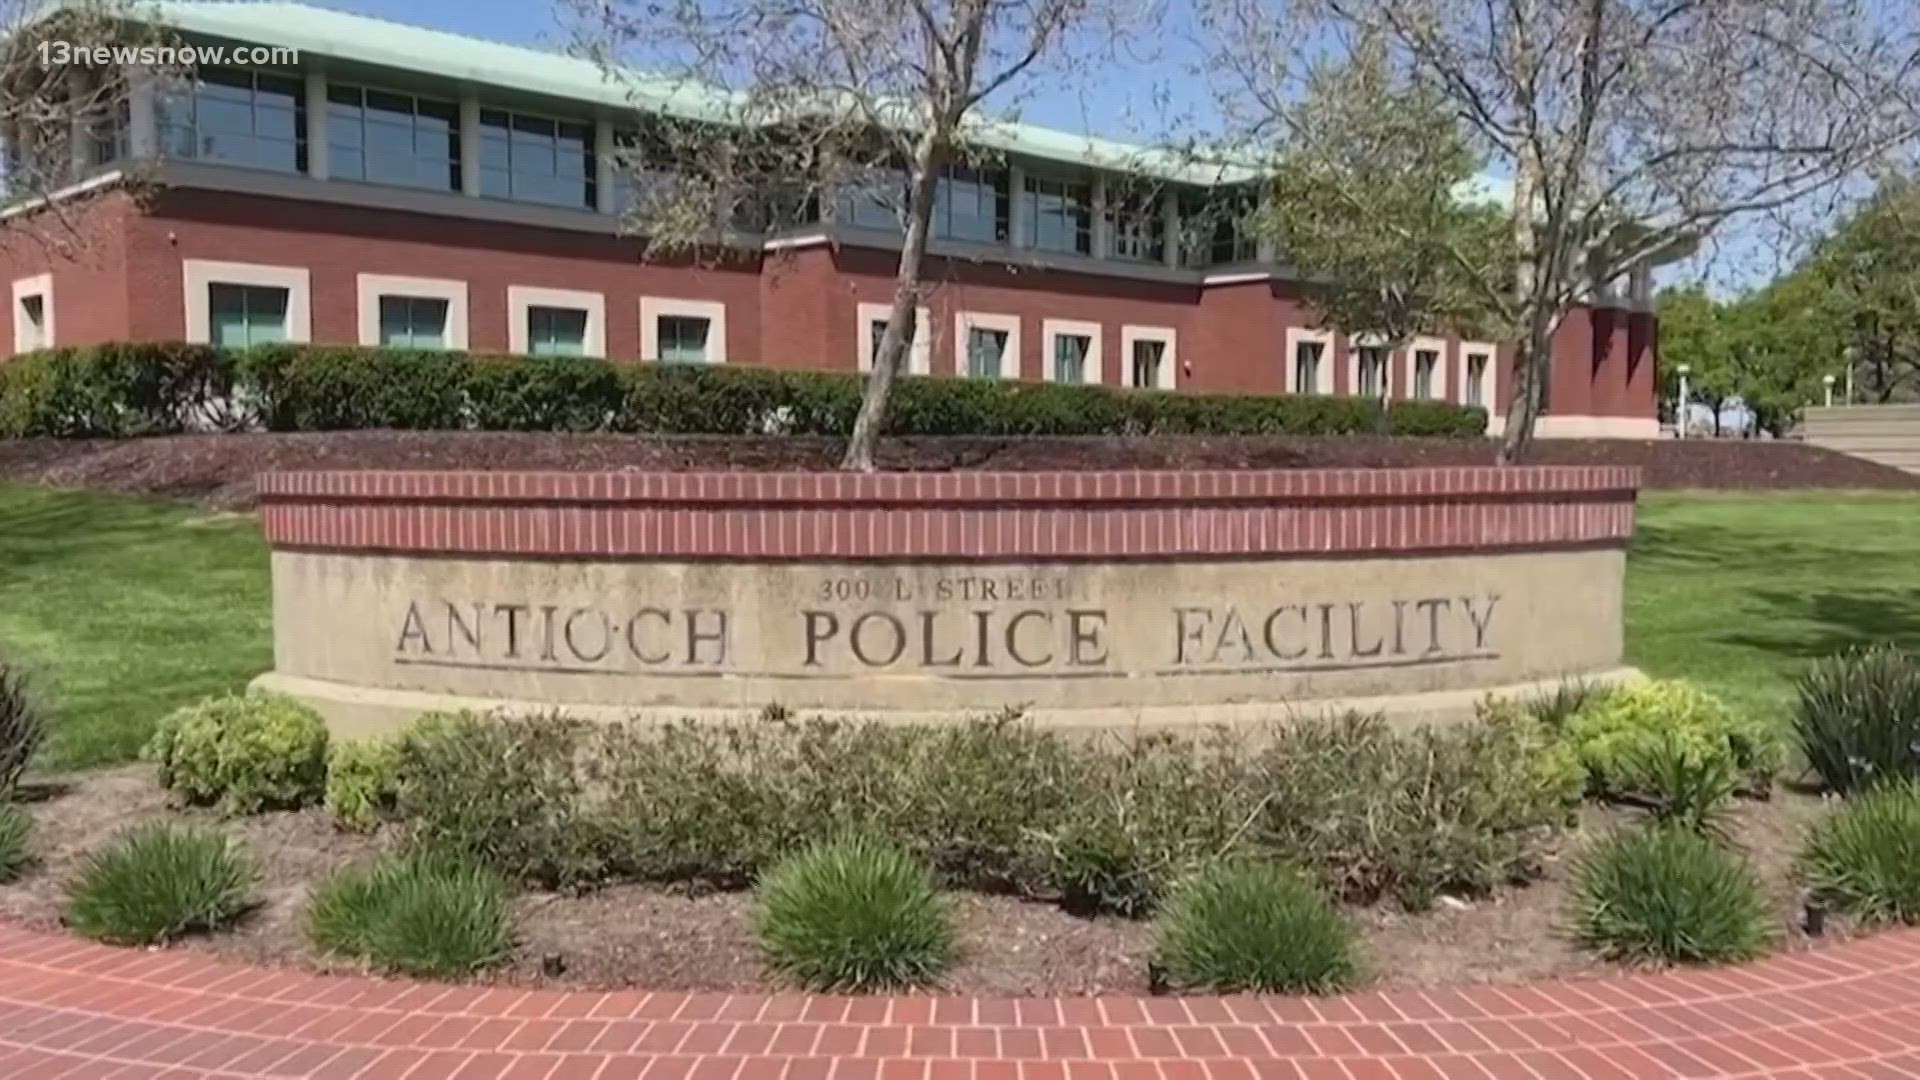 The Antioch, California, police department is facing accusations that several of its officers are racist, sexist, and homophobic